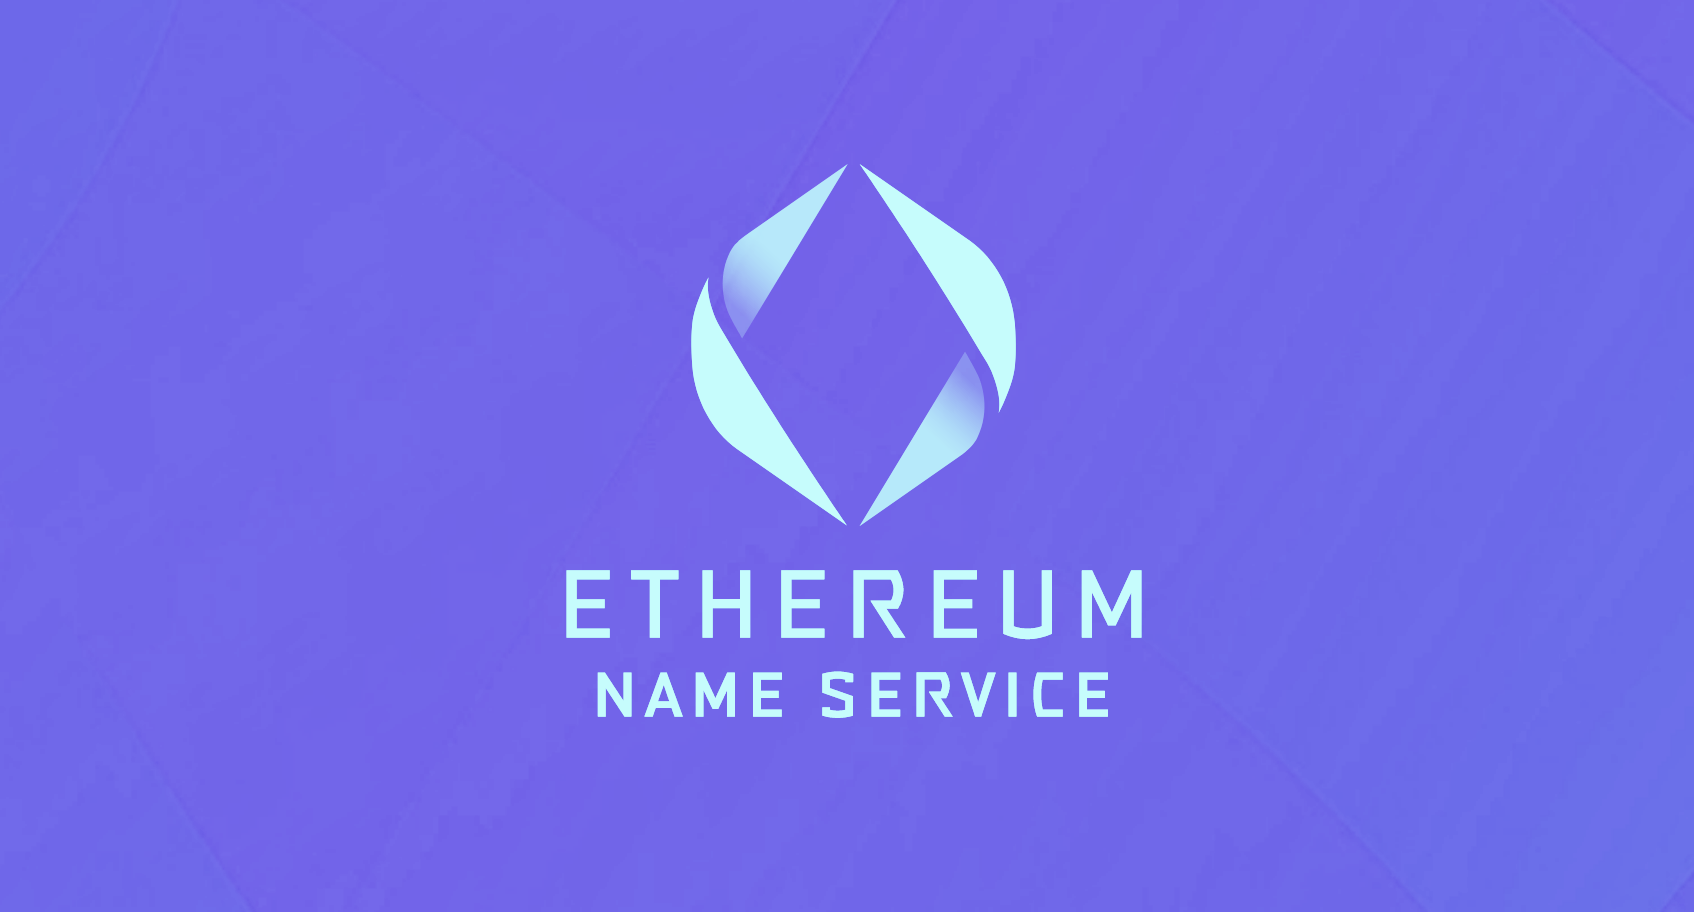 Ethereum Name Service (ENS) – The Next Wave of NFT is Coming